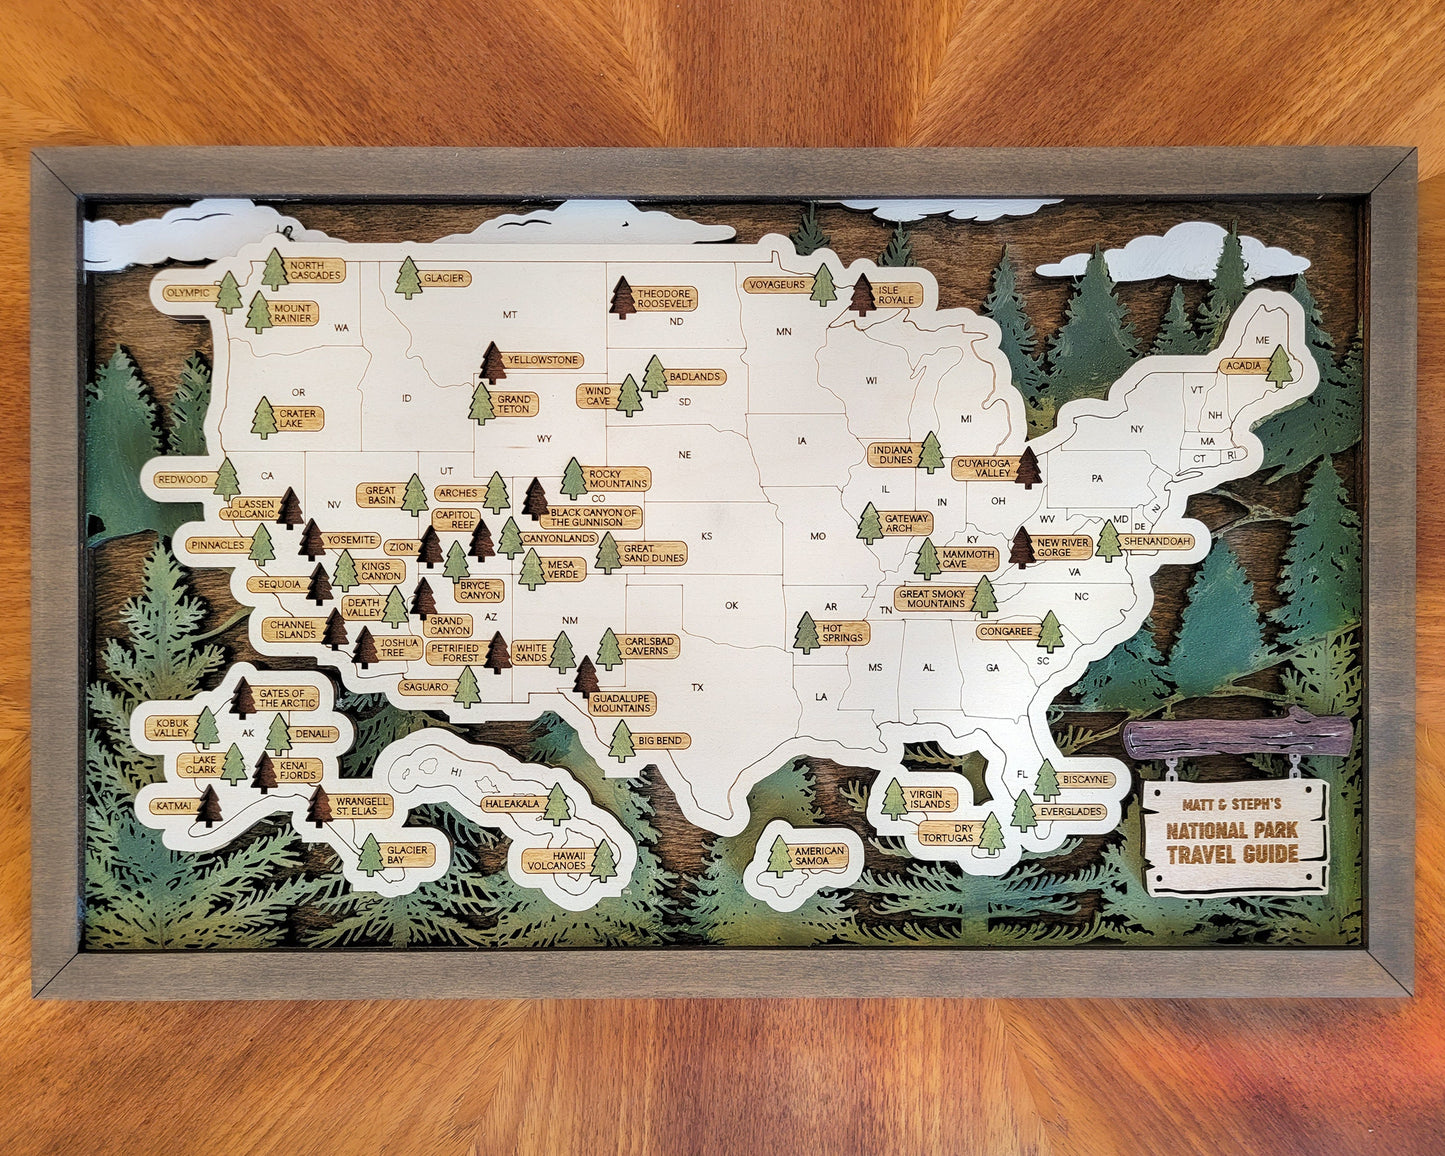 The National Parks Travel Map -  7 Backgrounds & 5 Customizable Name Plates - SVG File Download - Sized for Glowforge